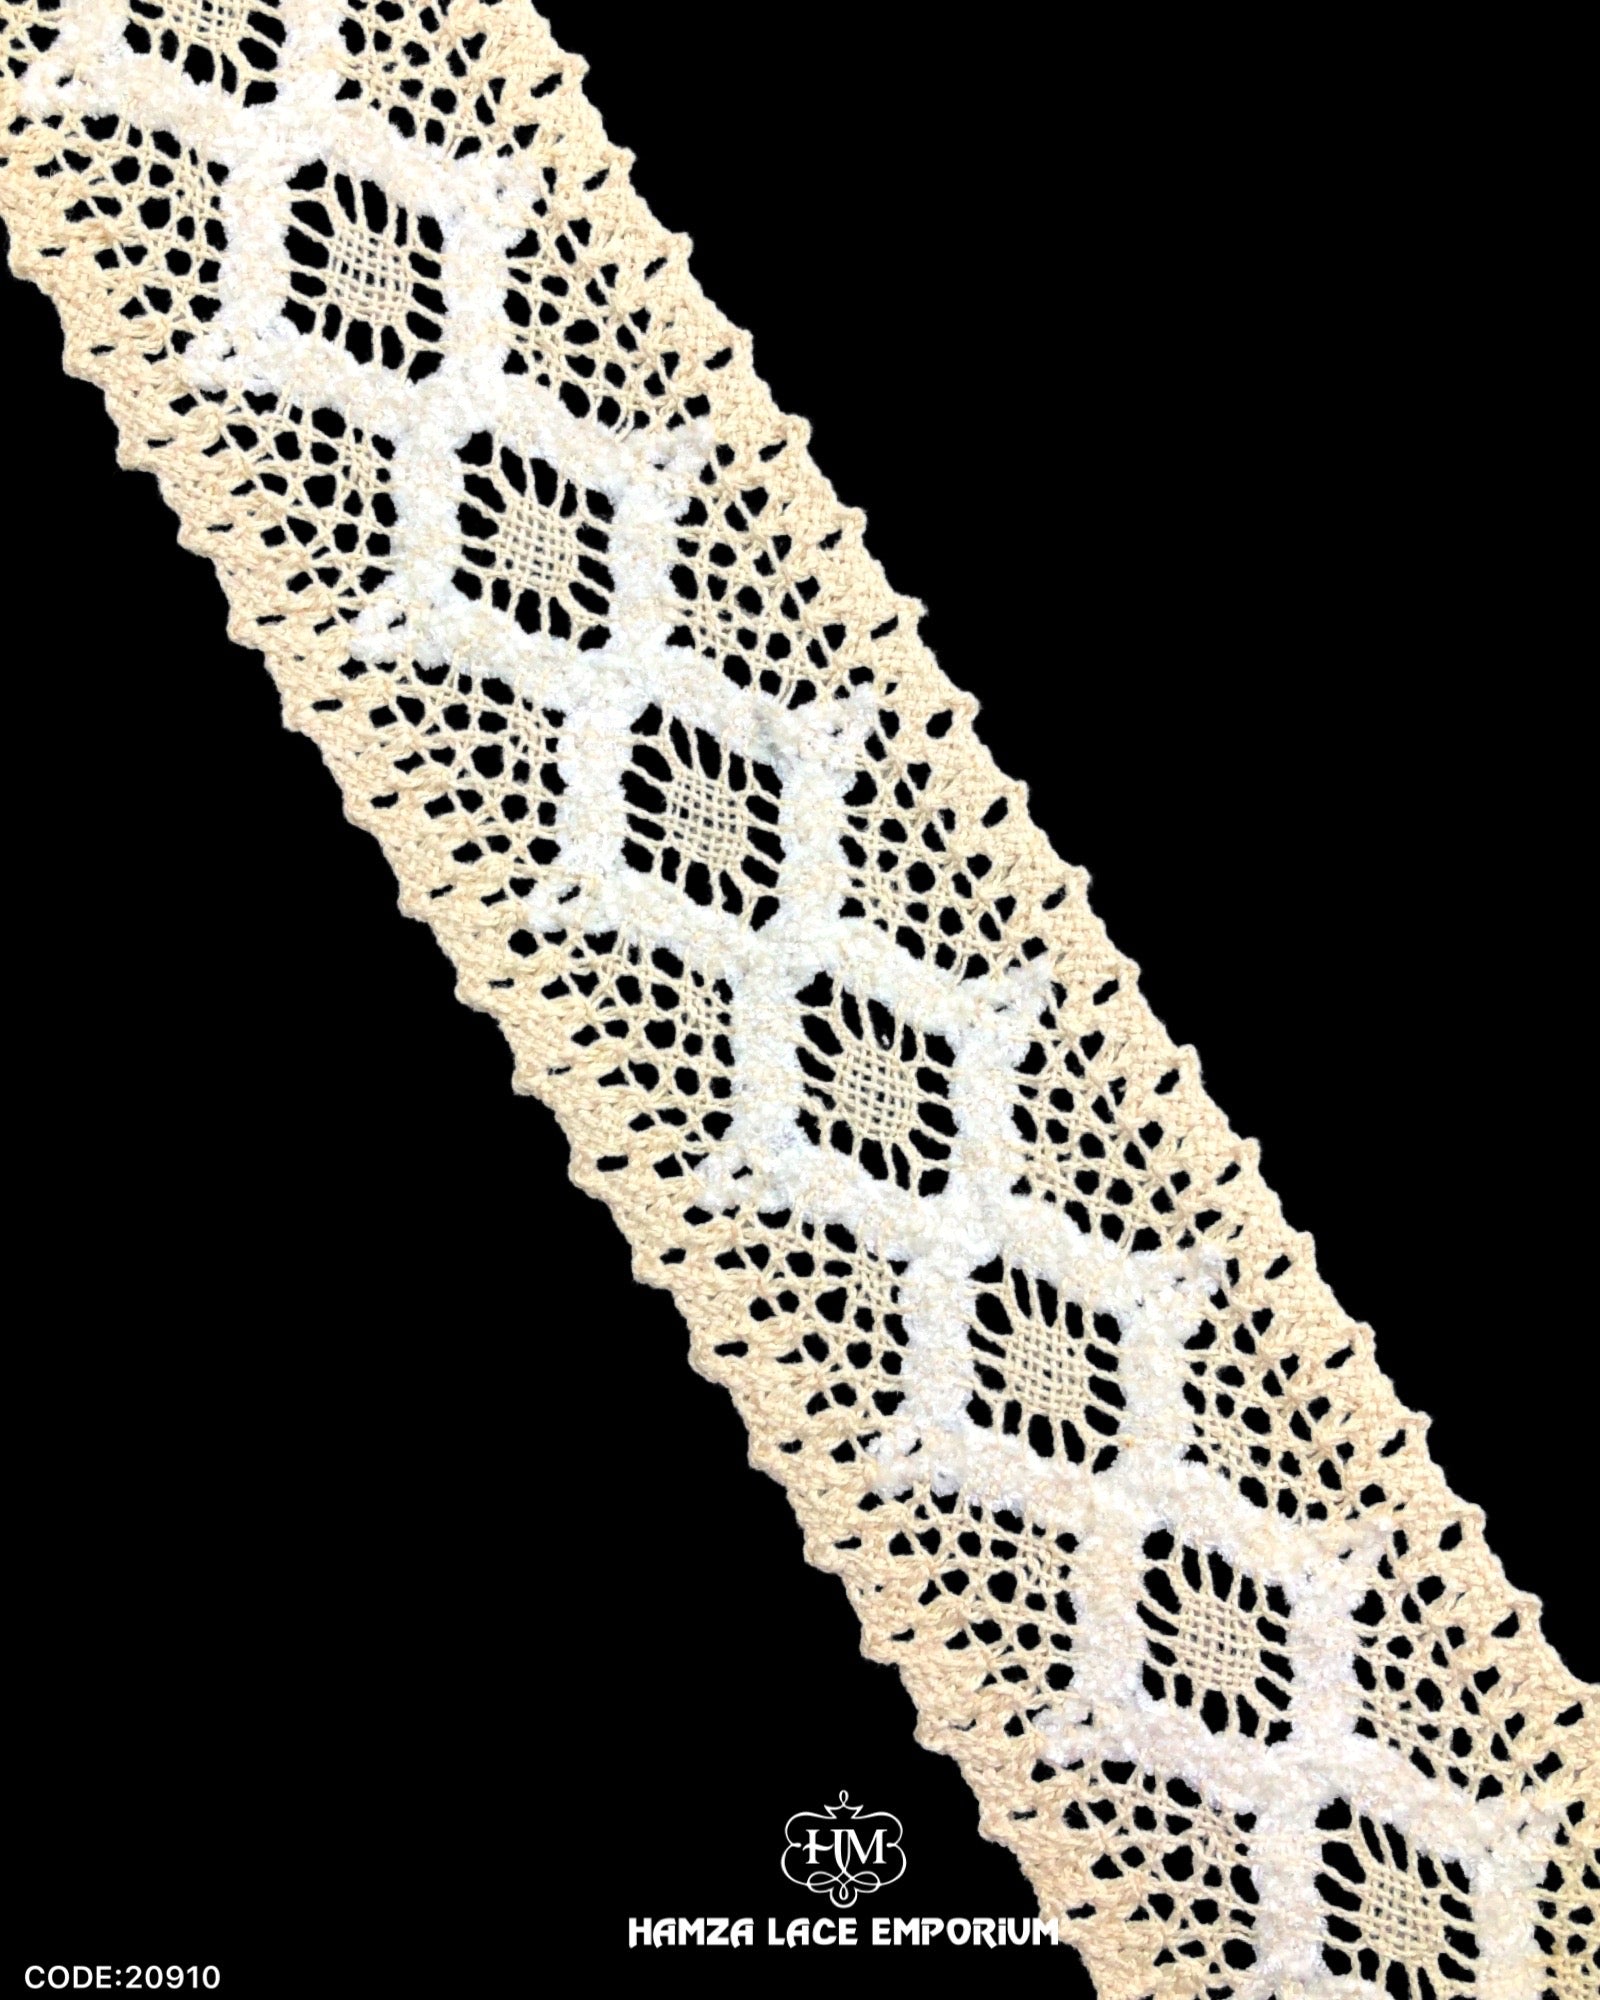 'Center Filling Crochet Lace 20910' with the brand name 'Hamza Lace' written at the bottom